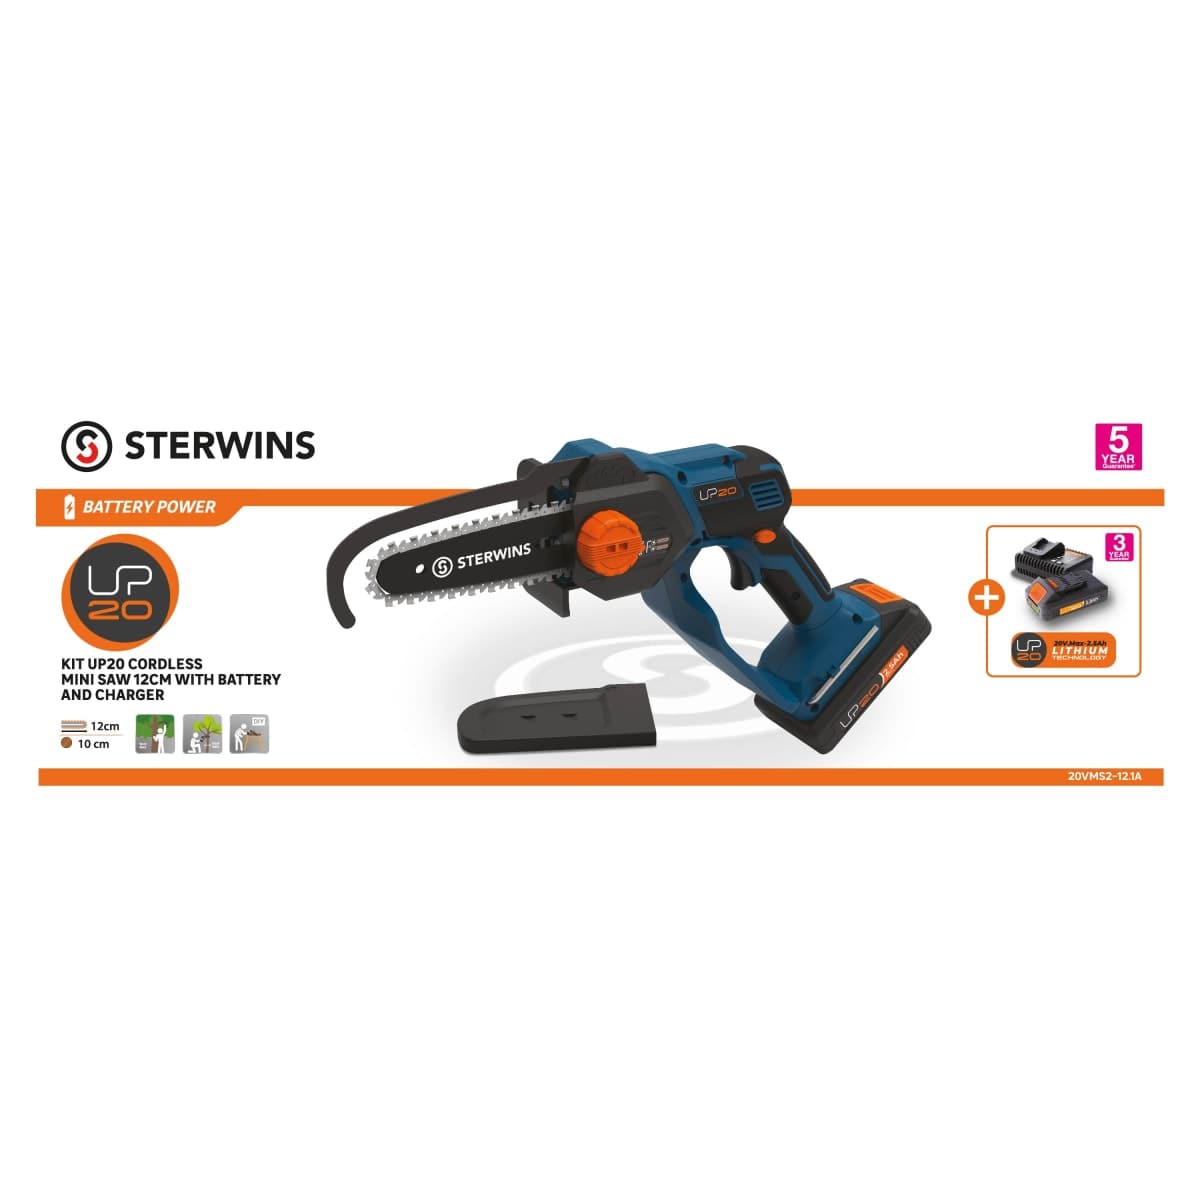 STERWINS 12CM UP20 CORDLESS PRUNER KIT WITH BATTERY AND CHARGER - best price from Maltashopper.com BR500015844